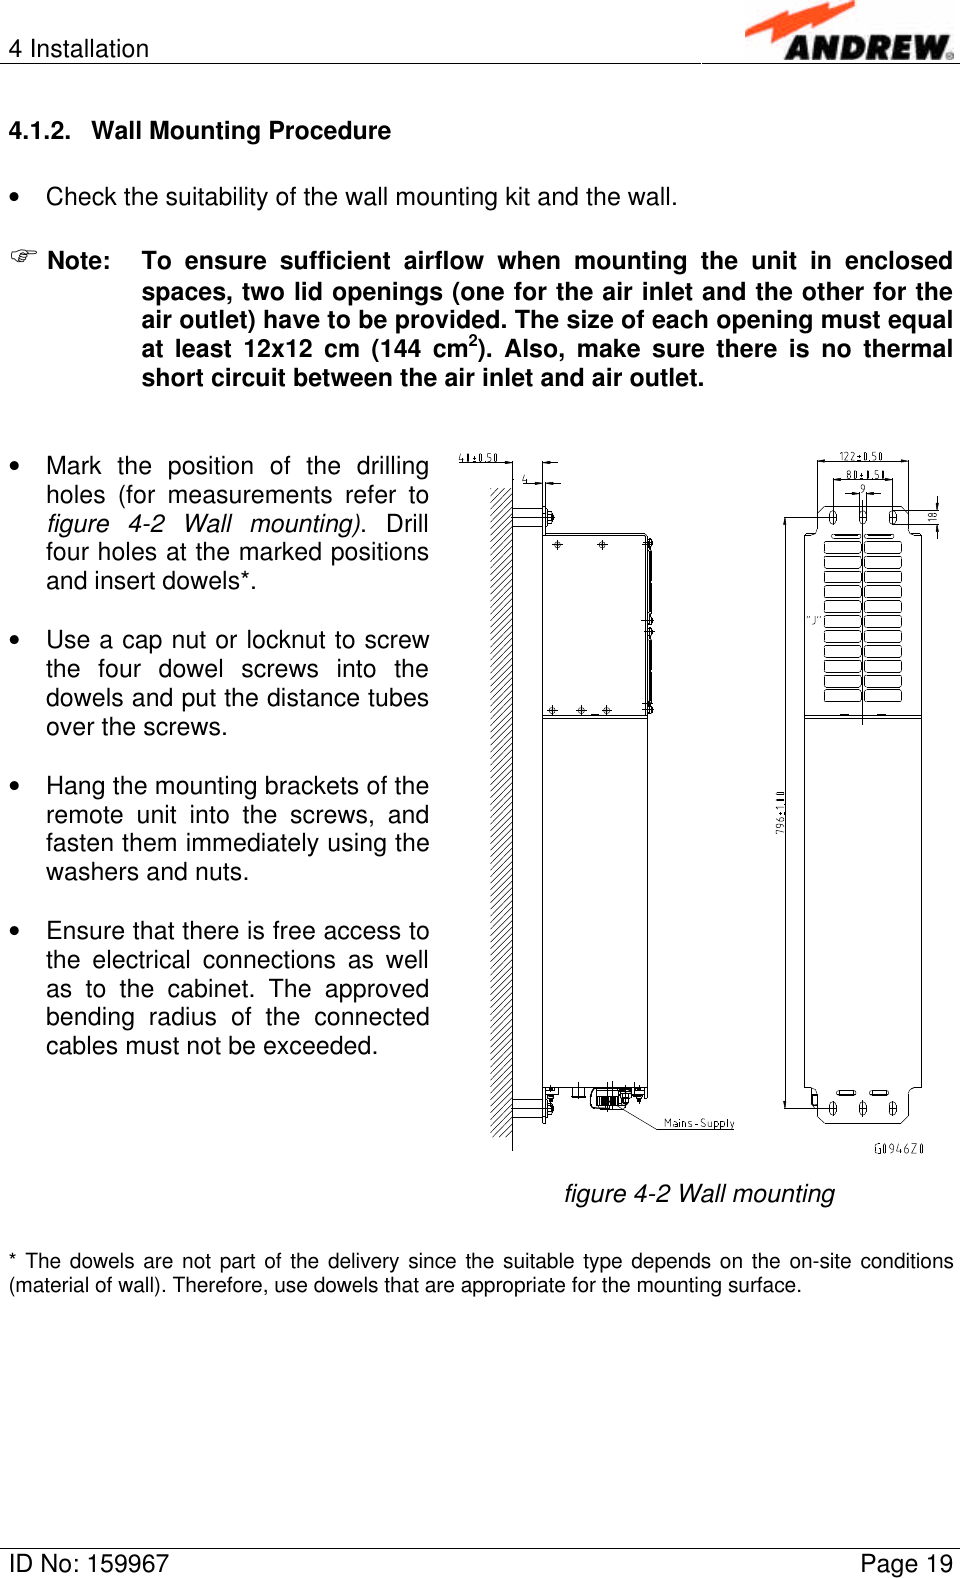 4 InstallationID No: 159967 Page 194.1.2. Wall Mounting Procedure• Check the suitability of the wall mounting kit and the wall.F Note: To ensure sufficient airflow when mounting the unit in enclosedspaces, two lid openings (one for the air inlet and the other for theair outlet) have to be provided. The size of each opening must equalat least 12x12 cm (144 cm2). Also, make sure there is no thermalshort circuit between the air inlet and air outlet.• Mark the position of the drillingholes (for measurements refer tofigure 4-2 Wall mounting). Drillfour holes at the marked positionsand insert dowels*.• Use a cap nut or locknut to screwthe four dowel screws into thedowels and put the distance tubesover the screws.• Hang the mounting brackets of theremote unit into the screws, andfasten them immediately using thewashers and nuts.• Ensure that there is free access tothe electrical connections as wellas to the cabinet. The approvedbending radius of the connectedcables must not be exceeded.figure 4-2 Wall mounting* The dowels are not part of the delivery since the suitable type depends on the on-site conditions(material of wall). Therefore, use dowels that are appropriate for the mounting surface.